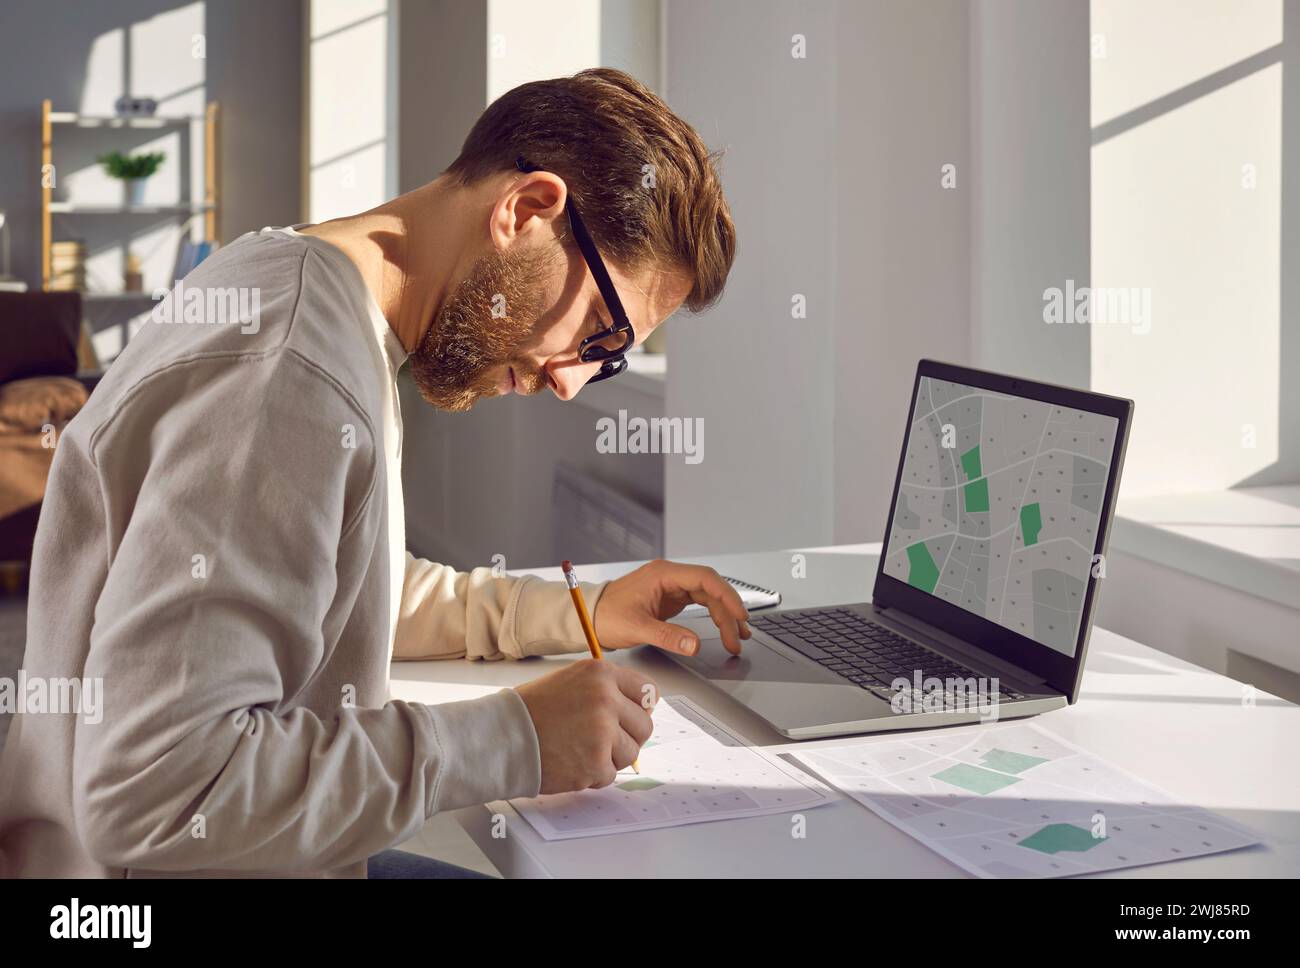 Professional cartographer working with printed cadastral map at table on his workplace. Stock Photo